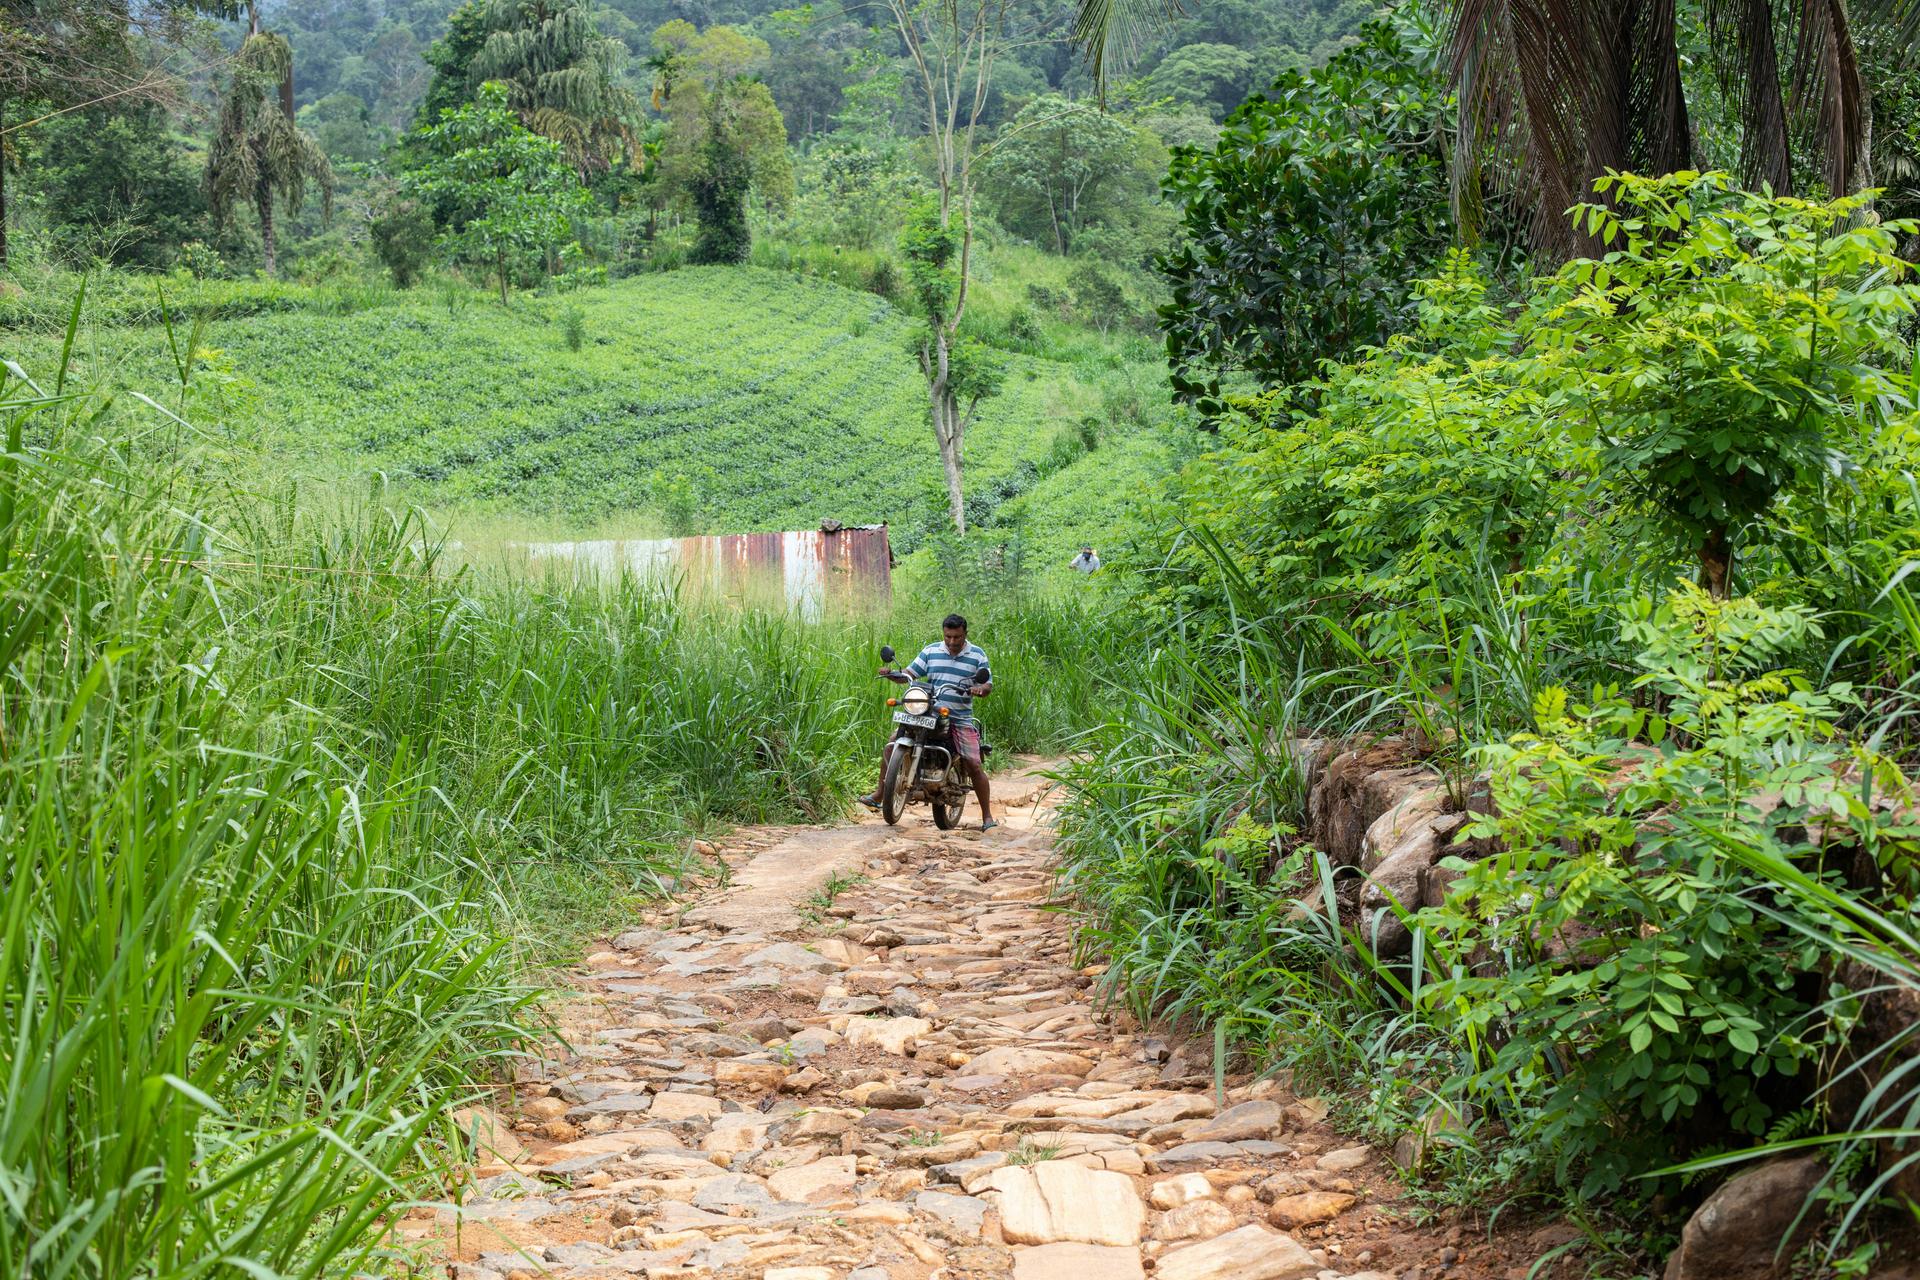 A young local man navigates his motorcycle up the single rural, uneven road in the small town of Deniyaya in Sri Lanka. The small road is surrounded by greenery.